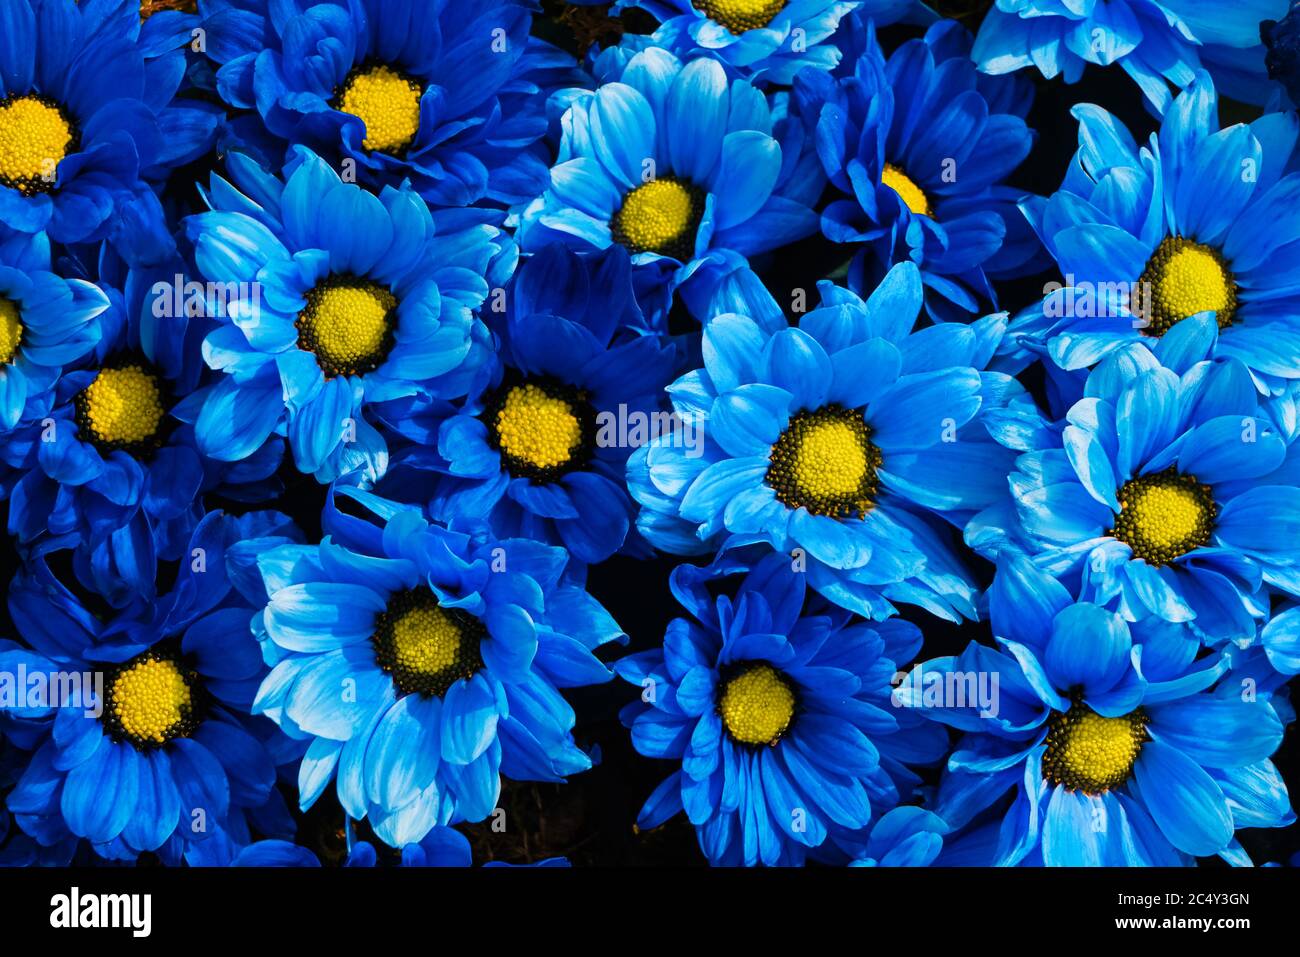 Beautiful blue flowers background. Colorful chrysanthemum flowers. Top view. Stock Photo